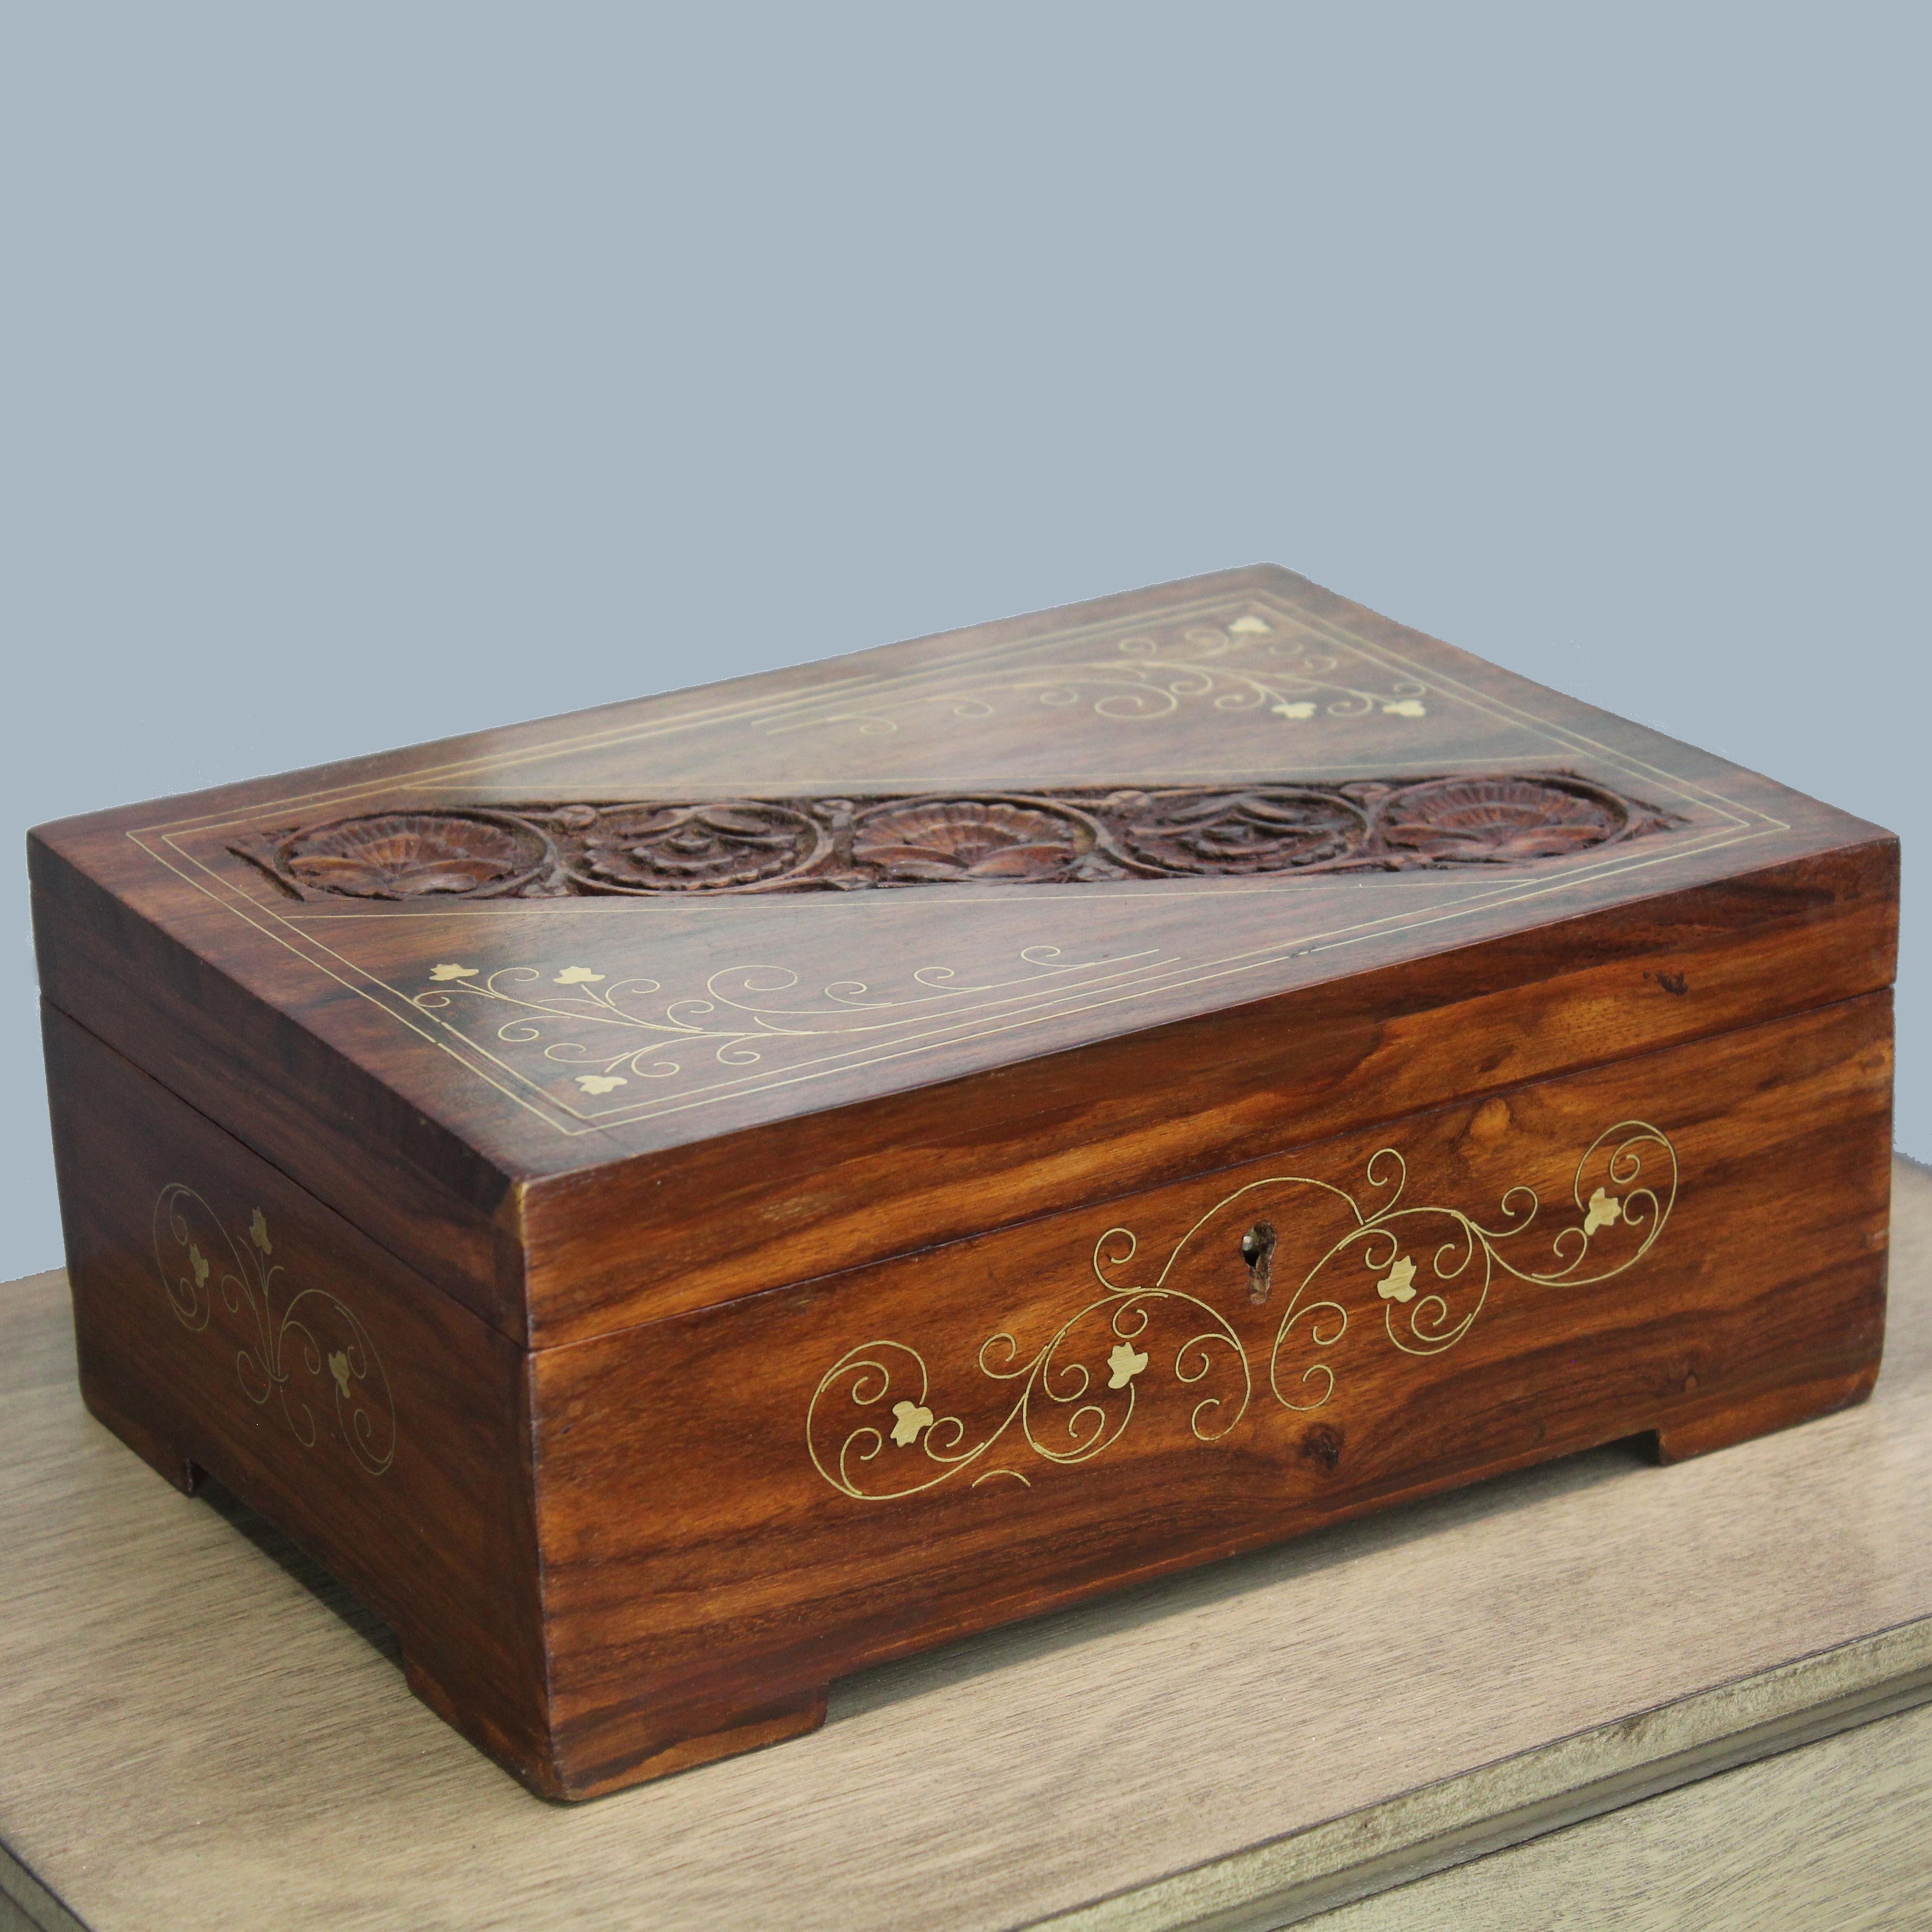 https://ak1.ostkcdn.com/images/products/is/images/direct/b27b9c34ab188e820039da92b43a0b61422a5dac/Natural-Geo-Handmade-Rosewood-Carved-Wooden-Decorative-Box-with-Key.jpg